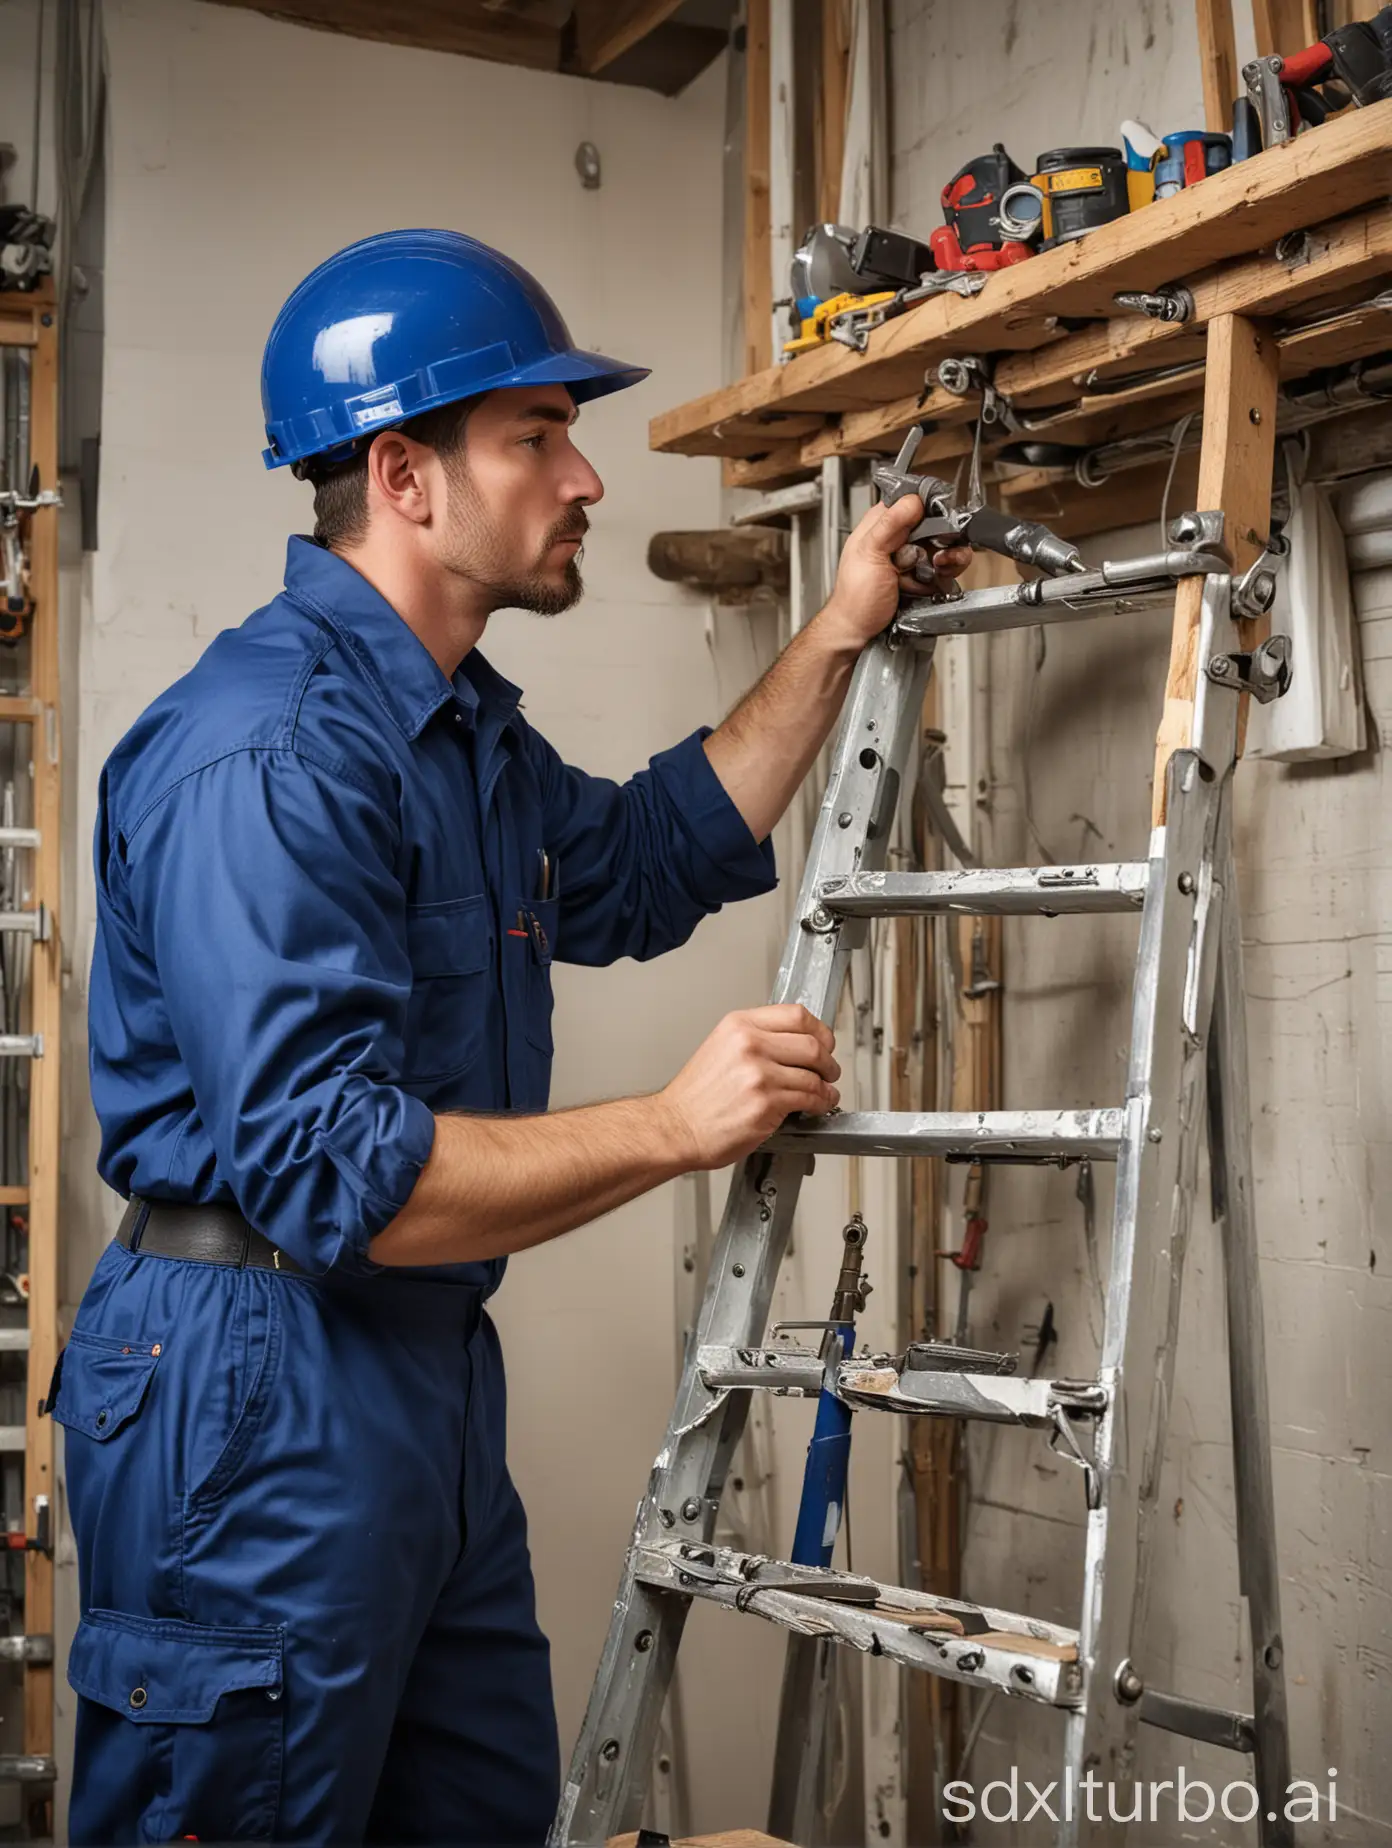 Professional-Plumber-in-Blue-Uniform-Tightening-Pipe-Joint-with-Wrench